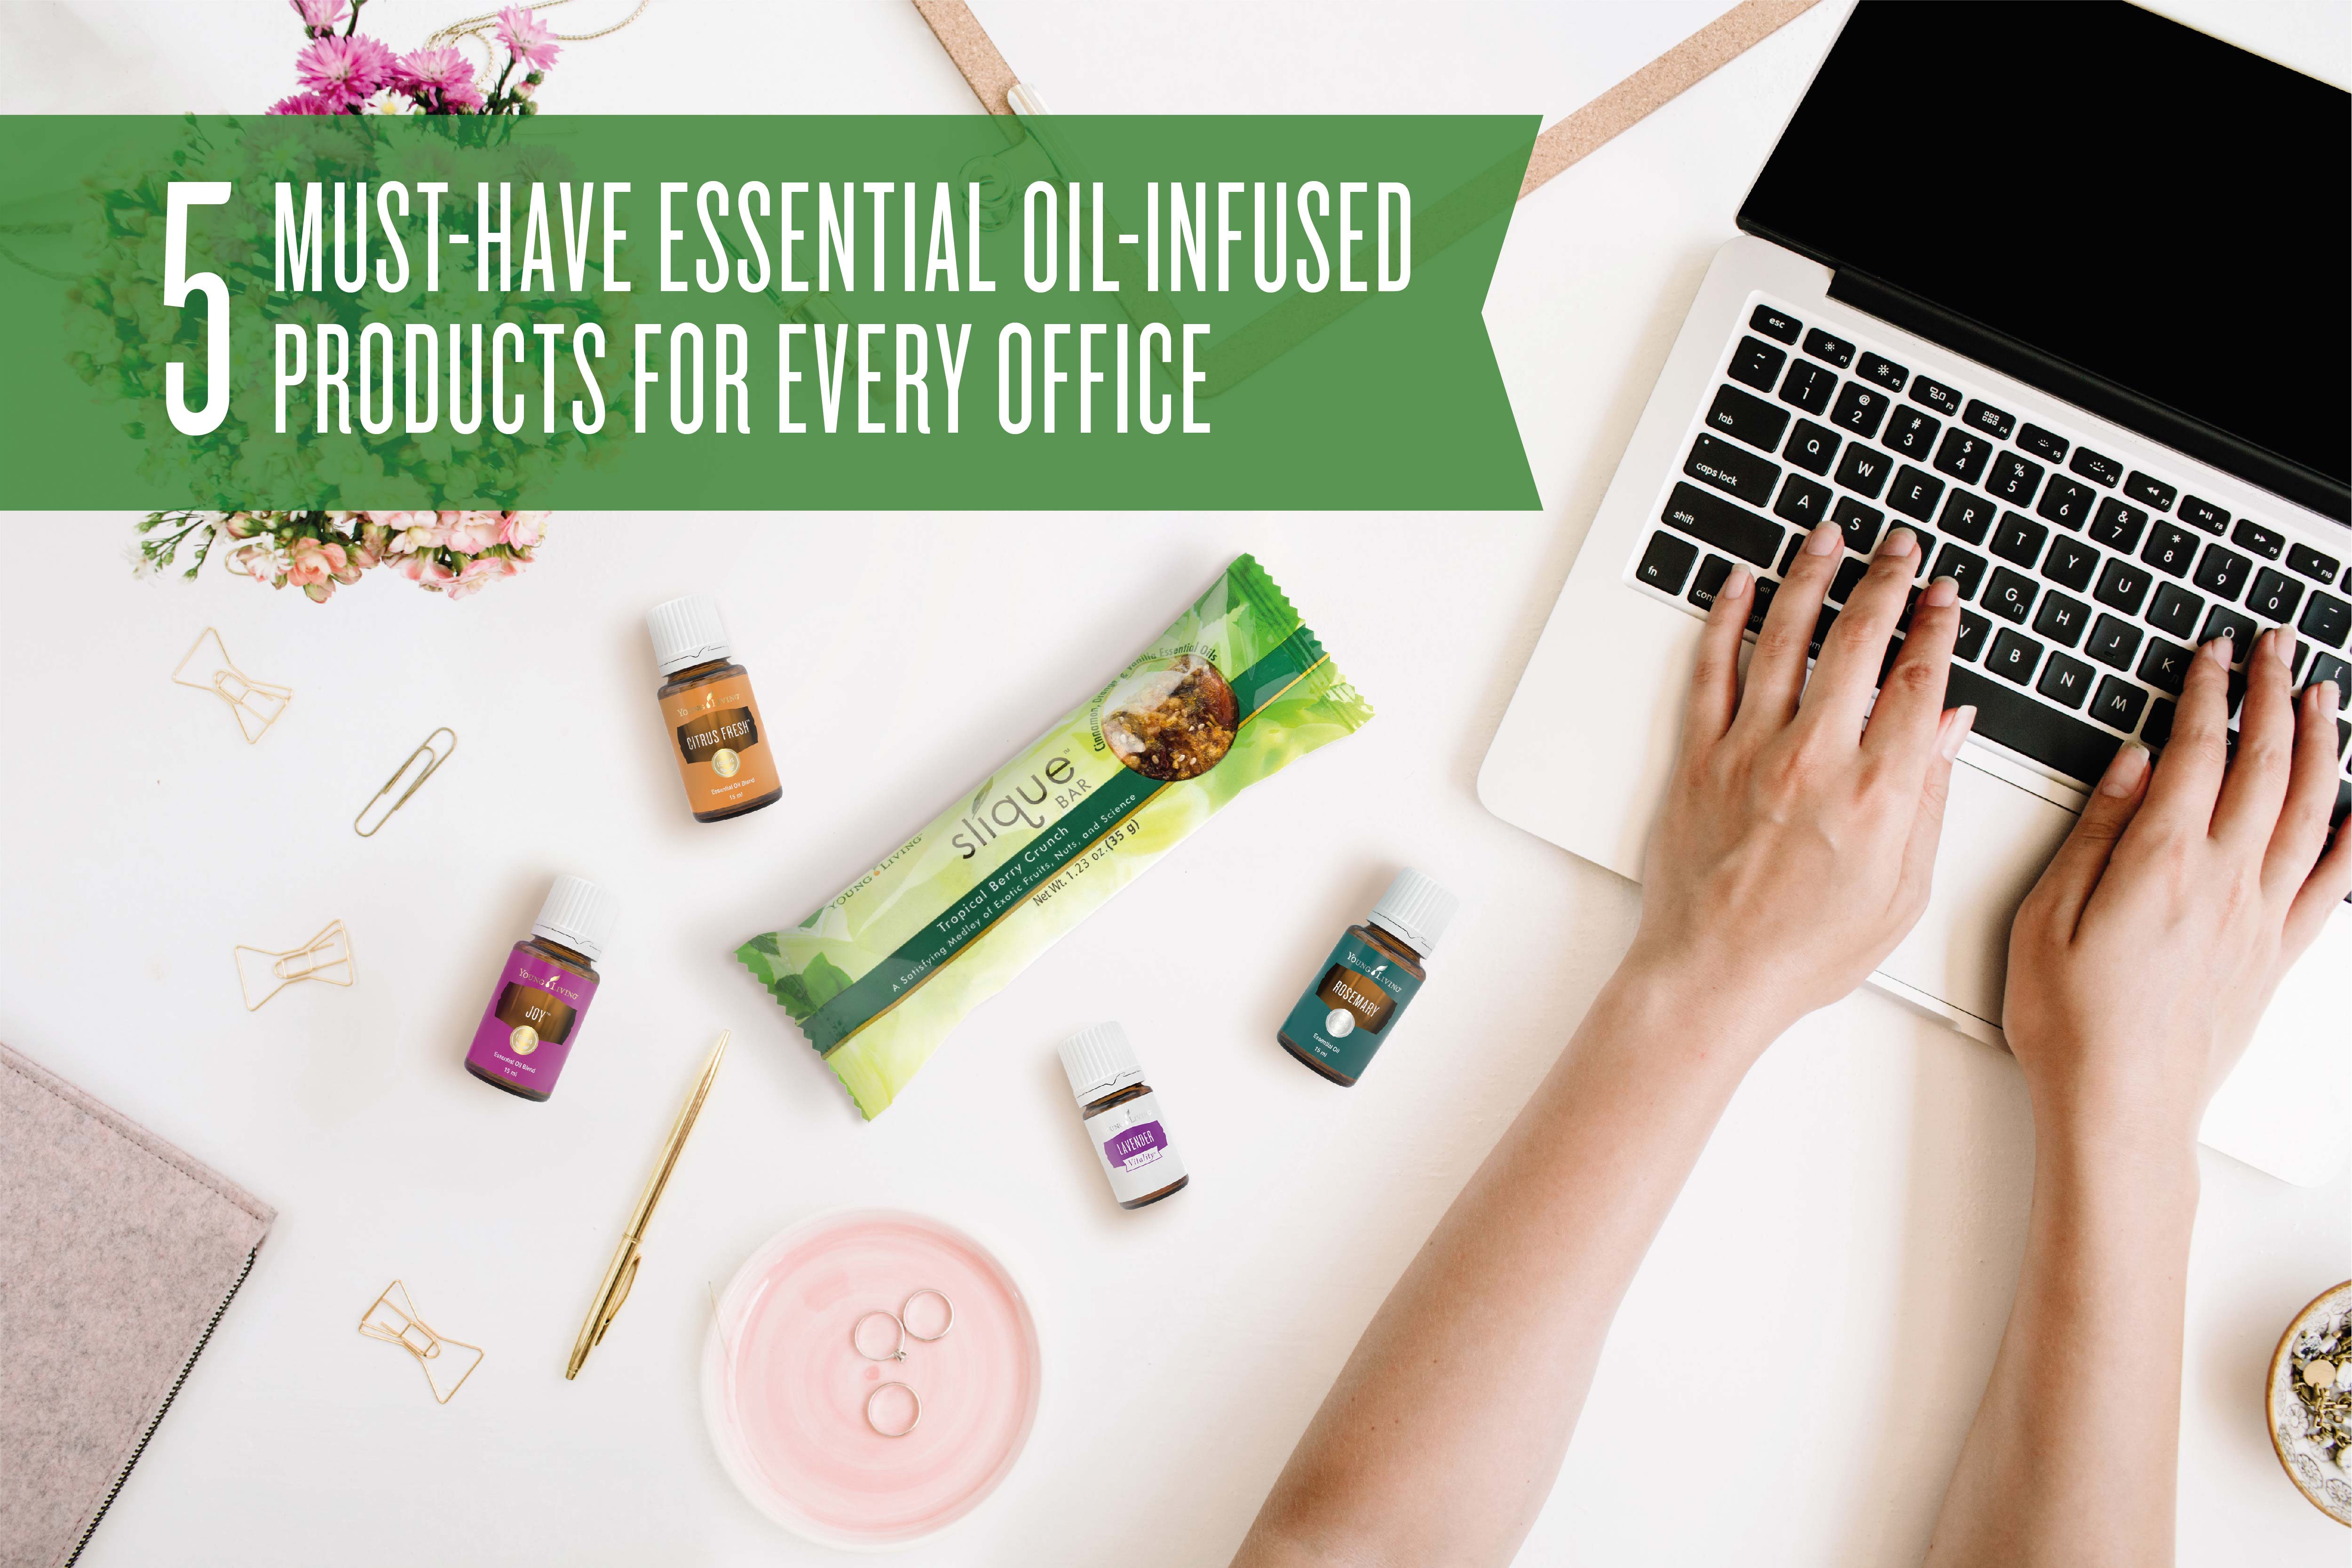 Essential Oils for the Office